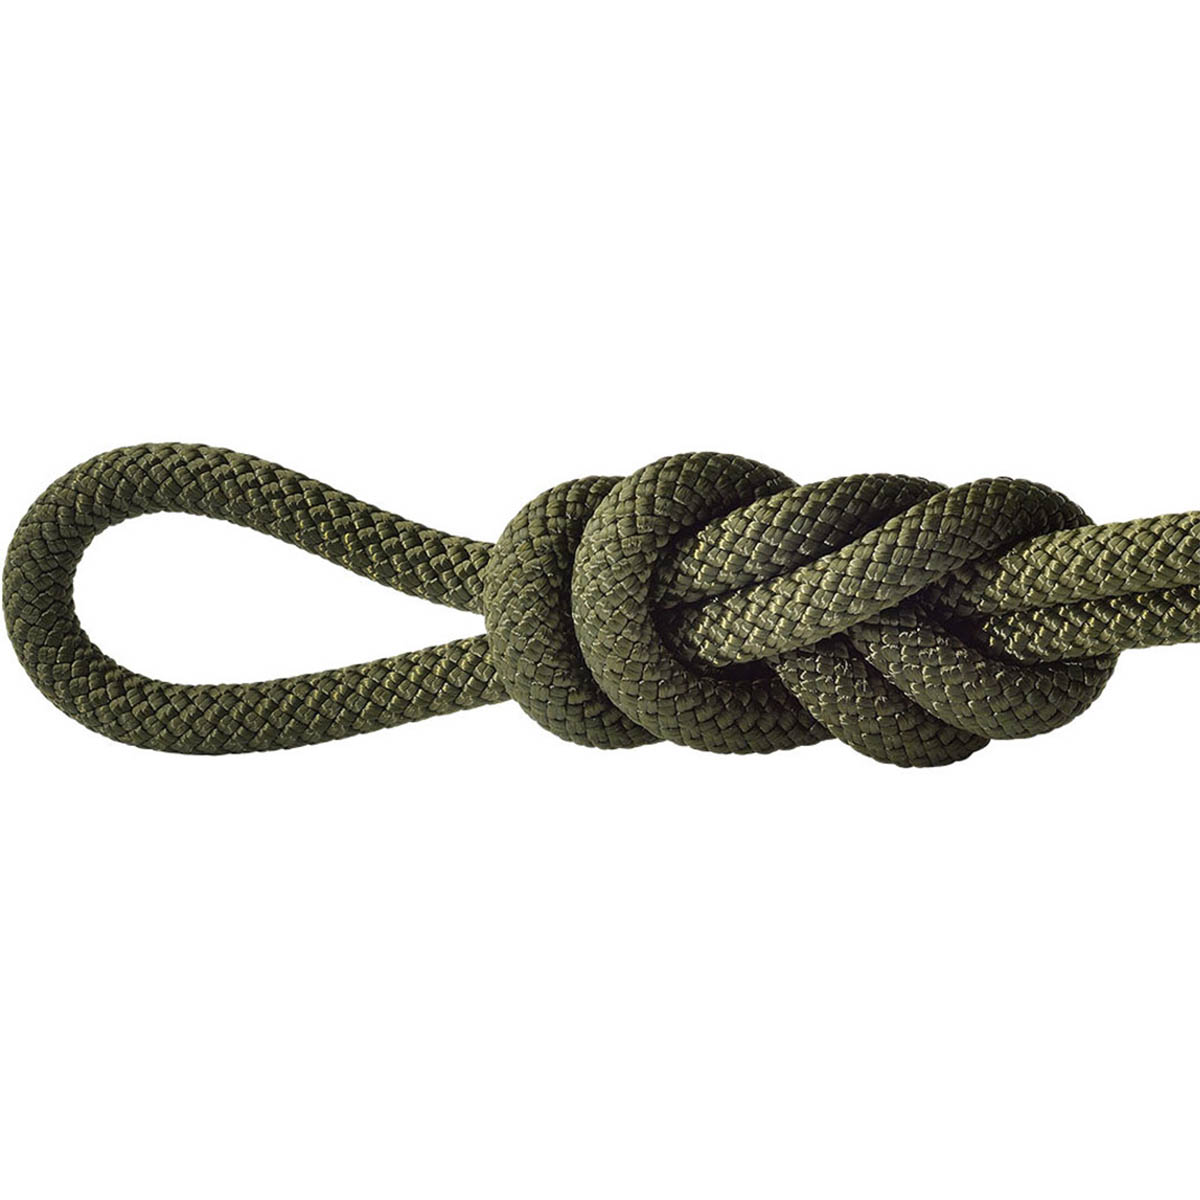 BUSTER Reflective Rope 180 cm Lead, Green, 8mm